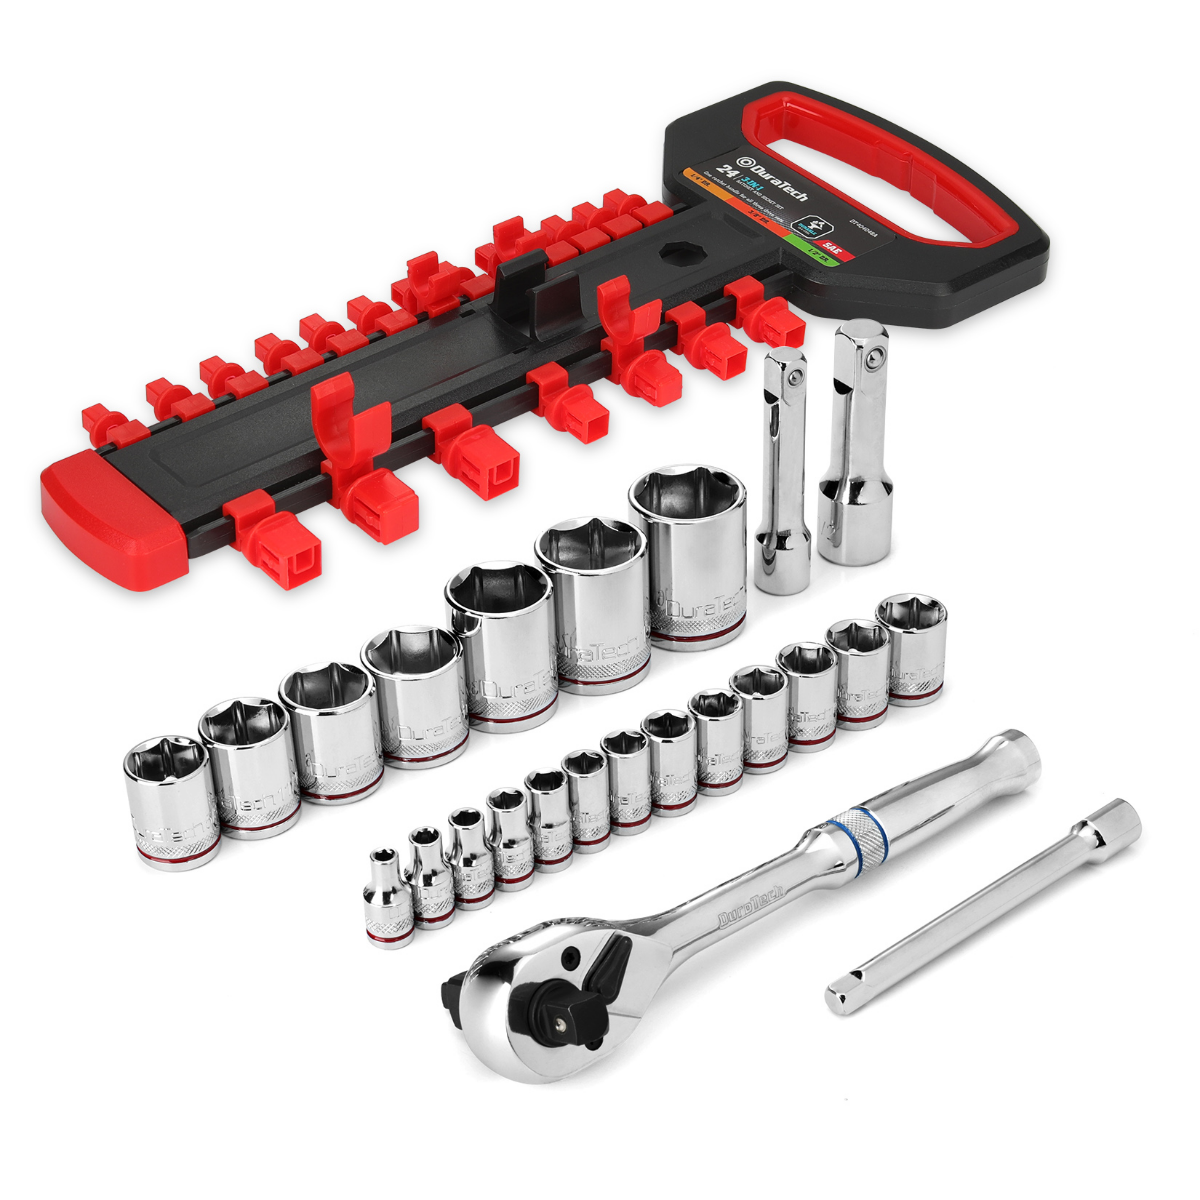 DURATECH 24-Piece Socket Wrench Set, SAE/Metric